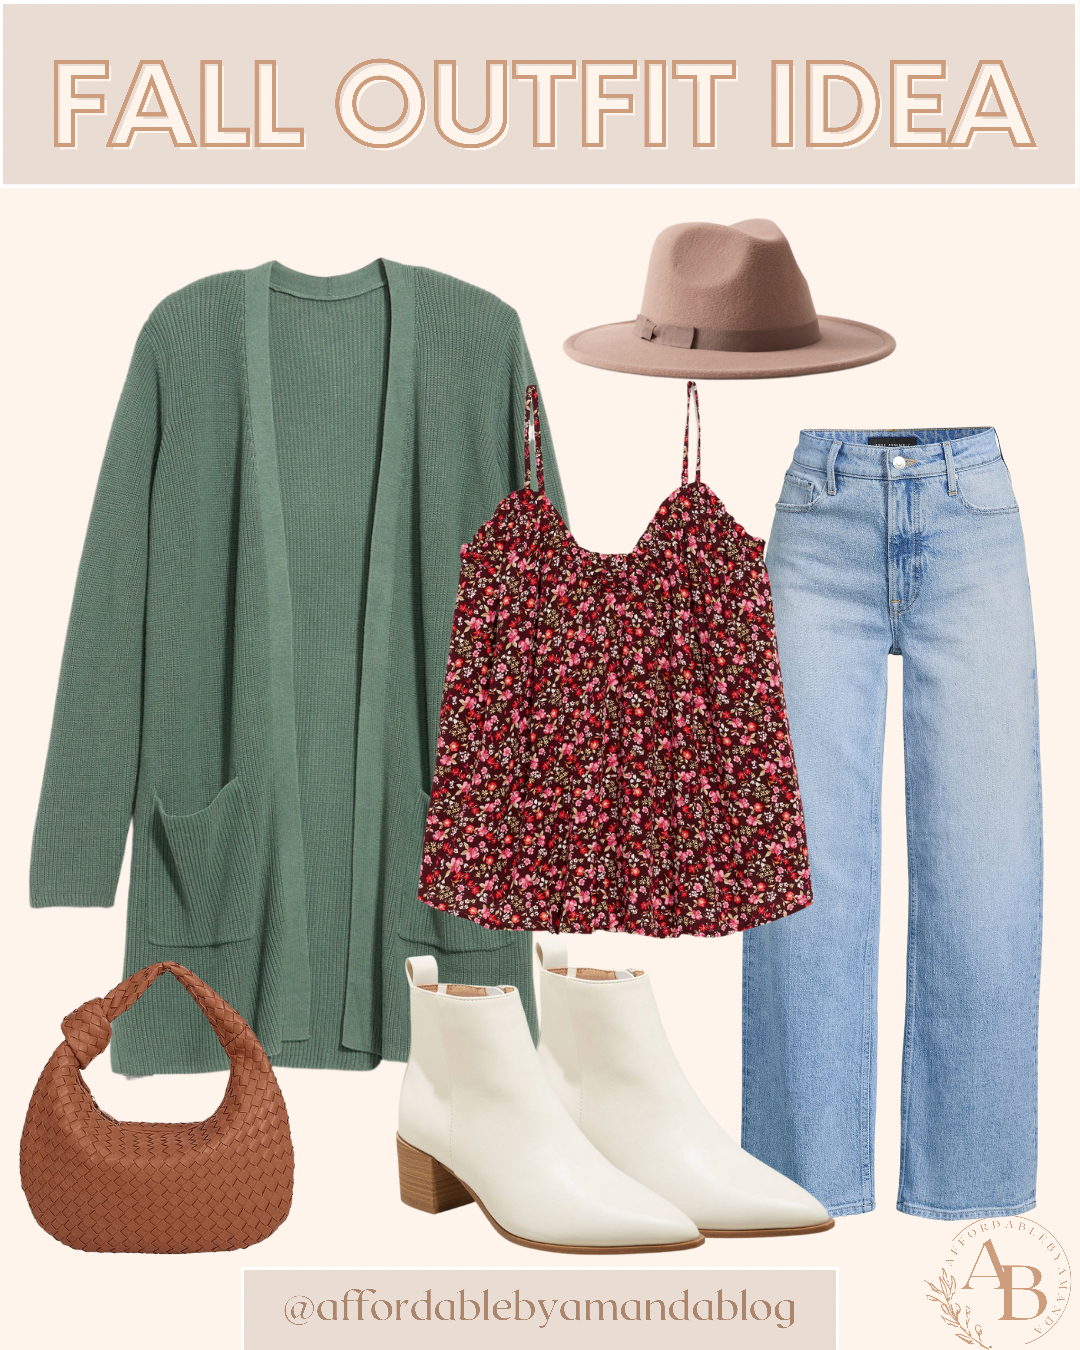 Trendy Fall Outfit Ideas 2021. Cute Fall Outfits 2021. Fall Fashion Trends for 2021. Casual Fall Outfit Ideas to Copy this Season.